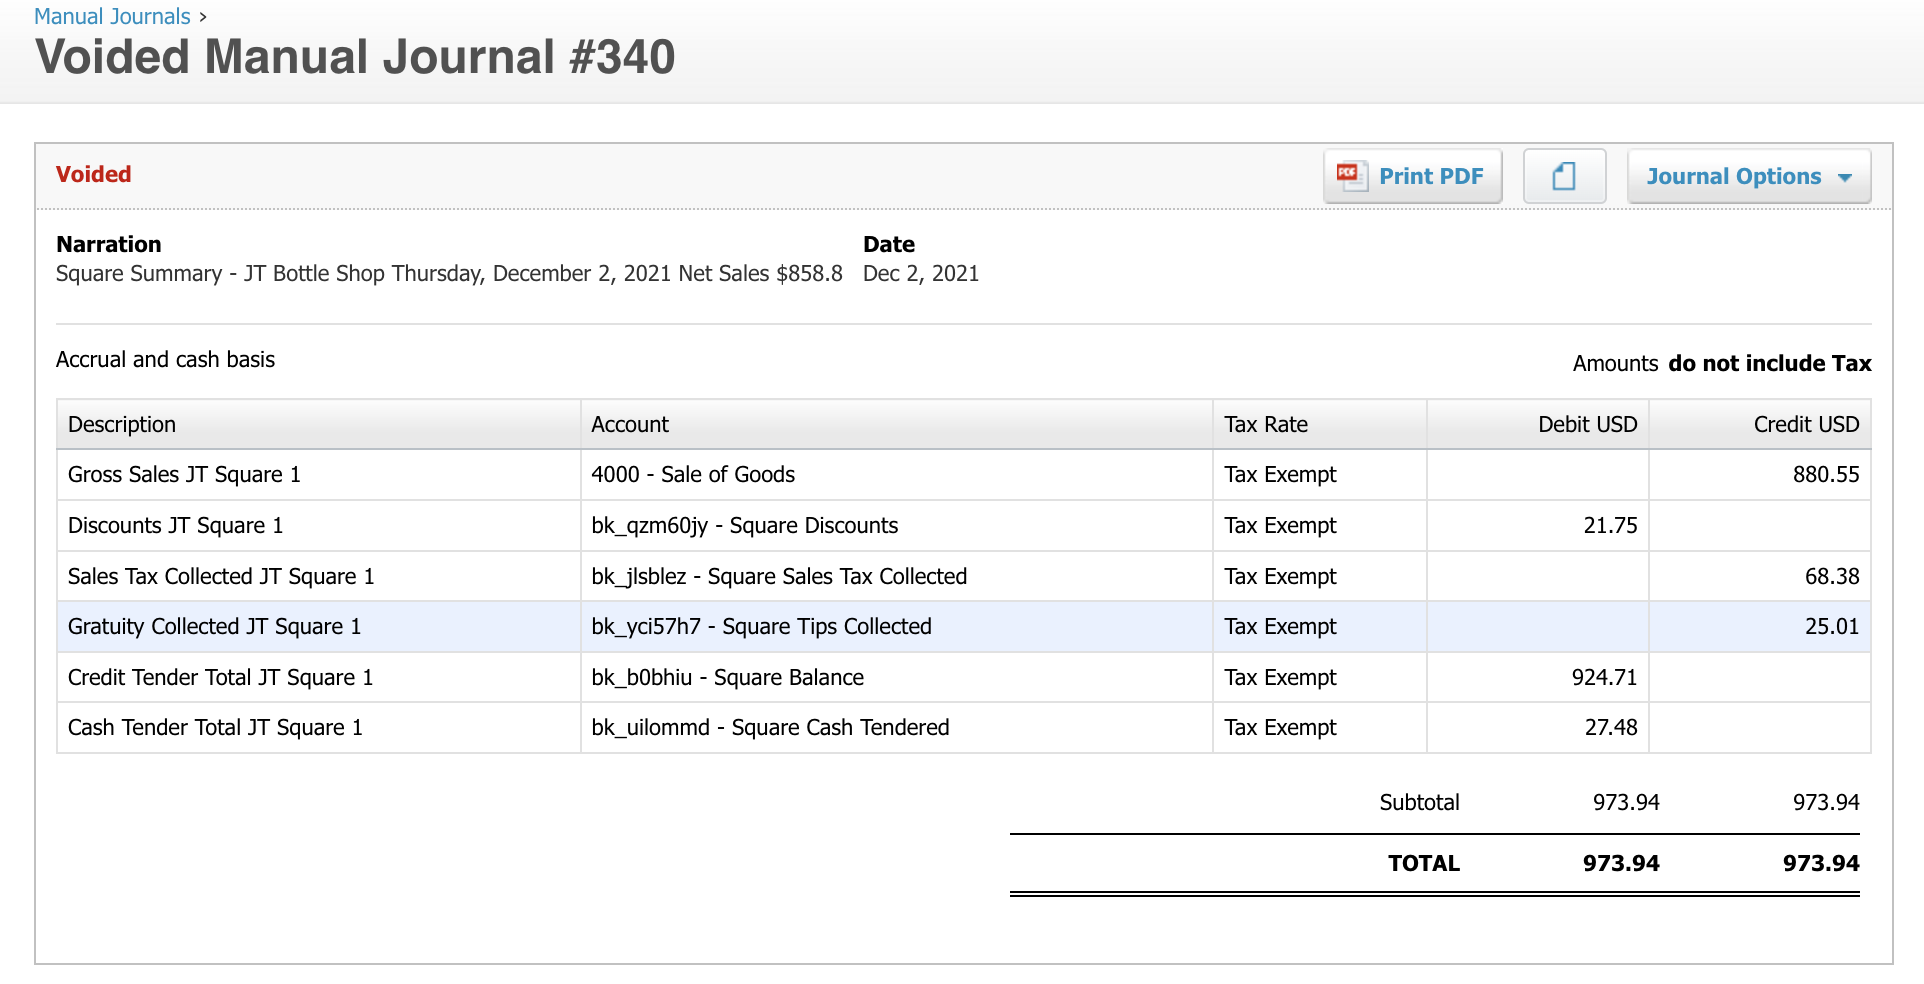 Screenshot showing the voided journal entry in Xero